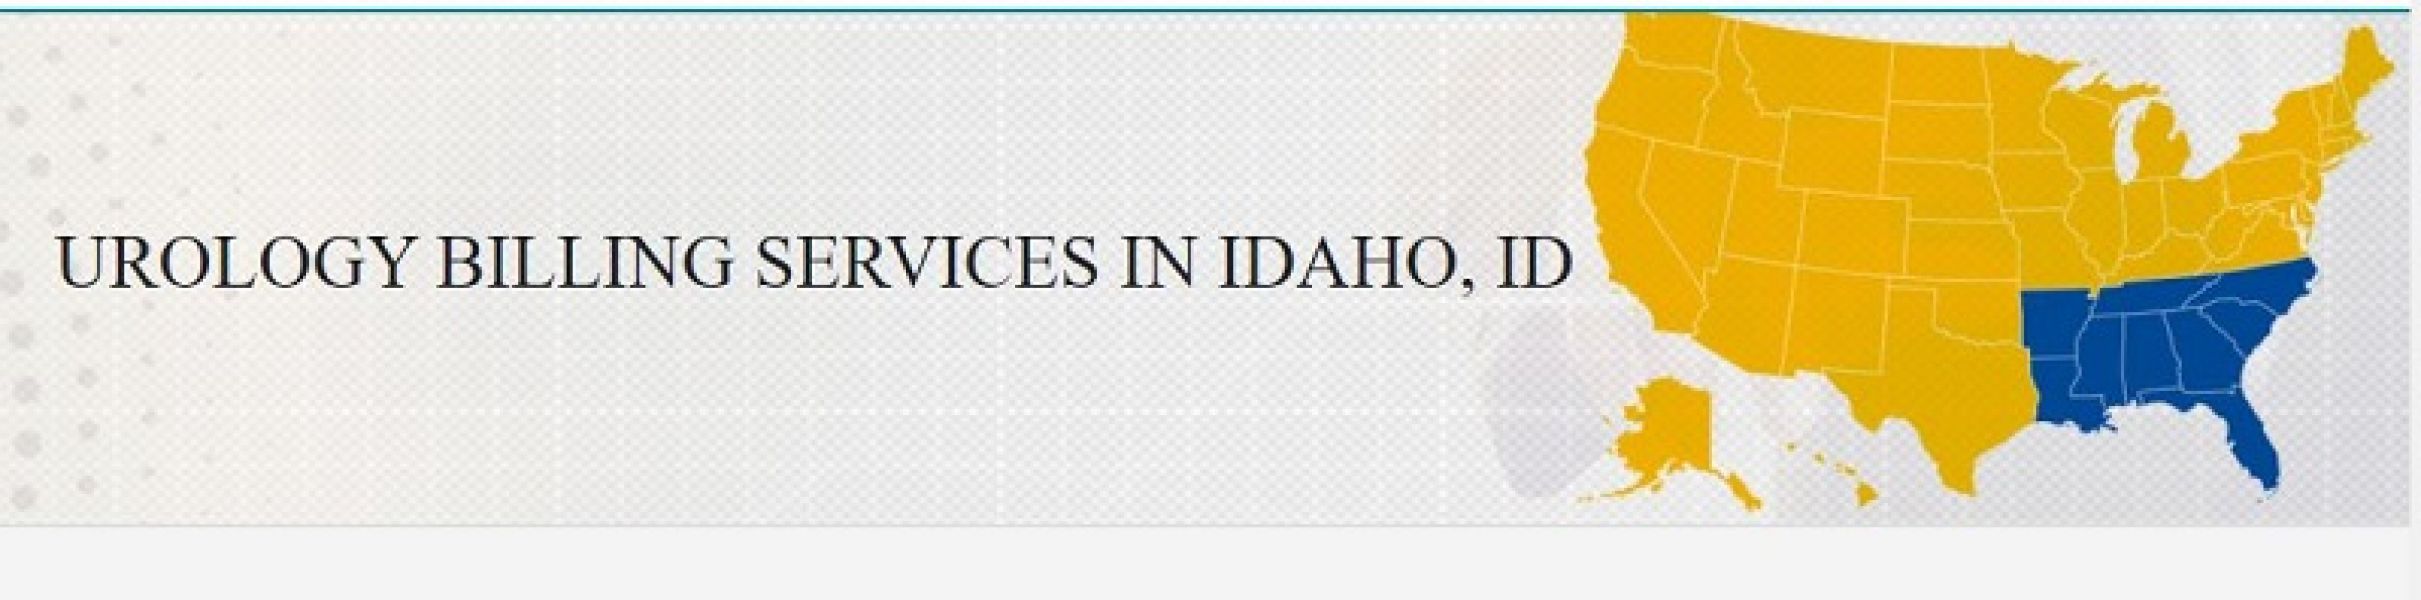 Experts in Urology Billing Services for Idaho, ID